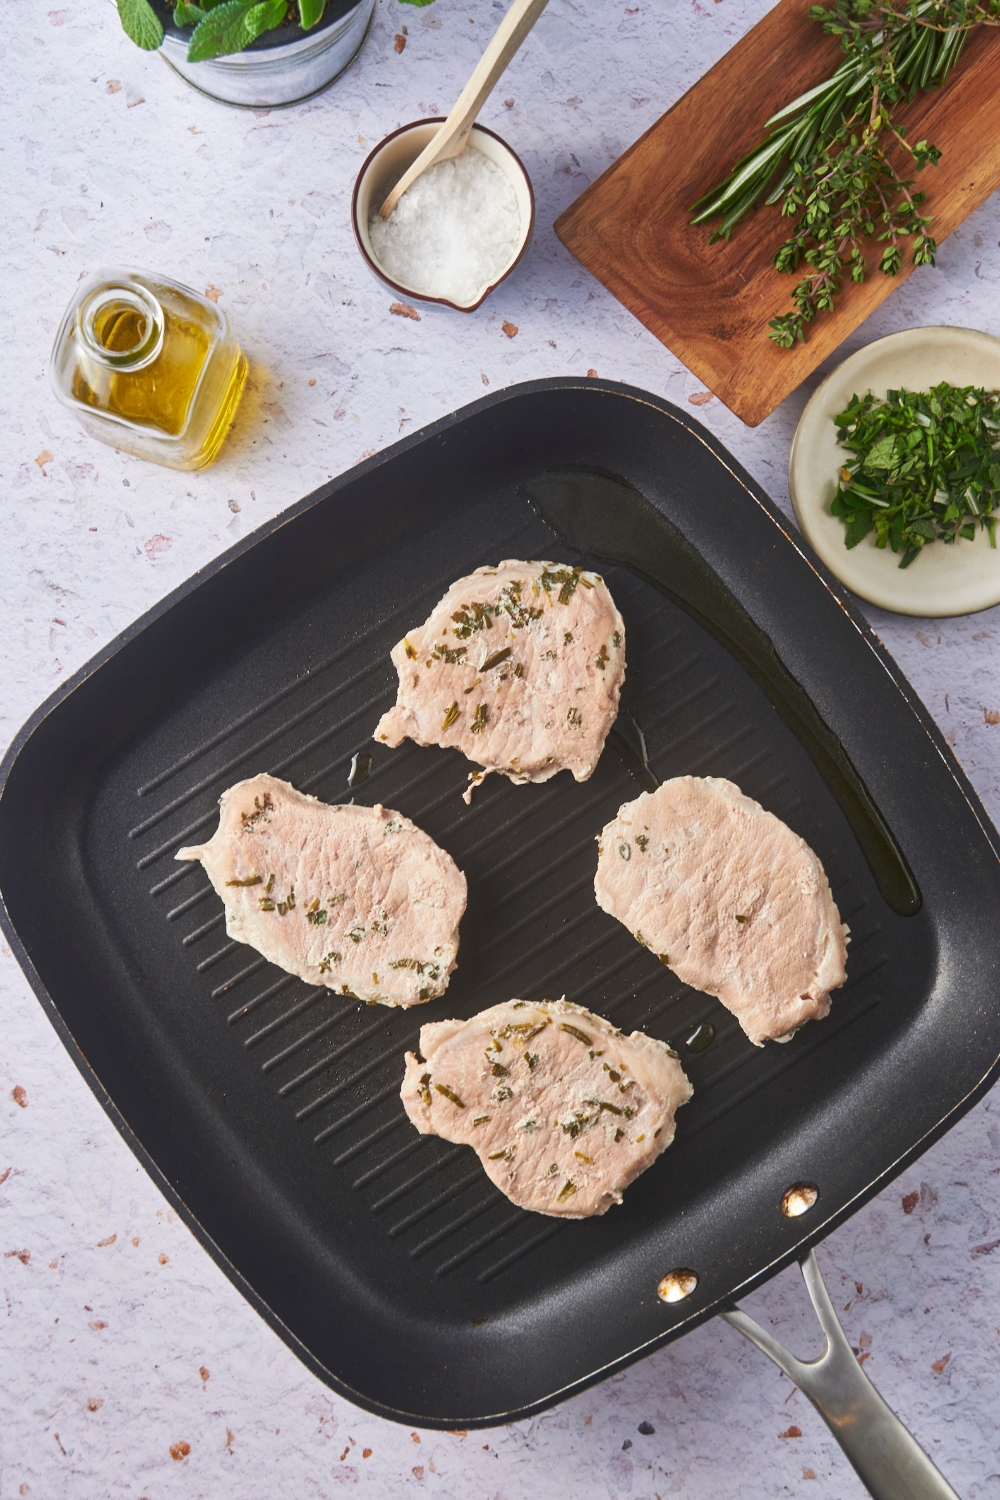 Four cooked pork chops on a black skillet, surrounded by ingredients including oil, salt, and fresh herbs.